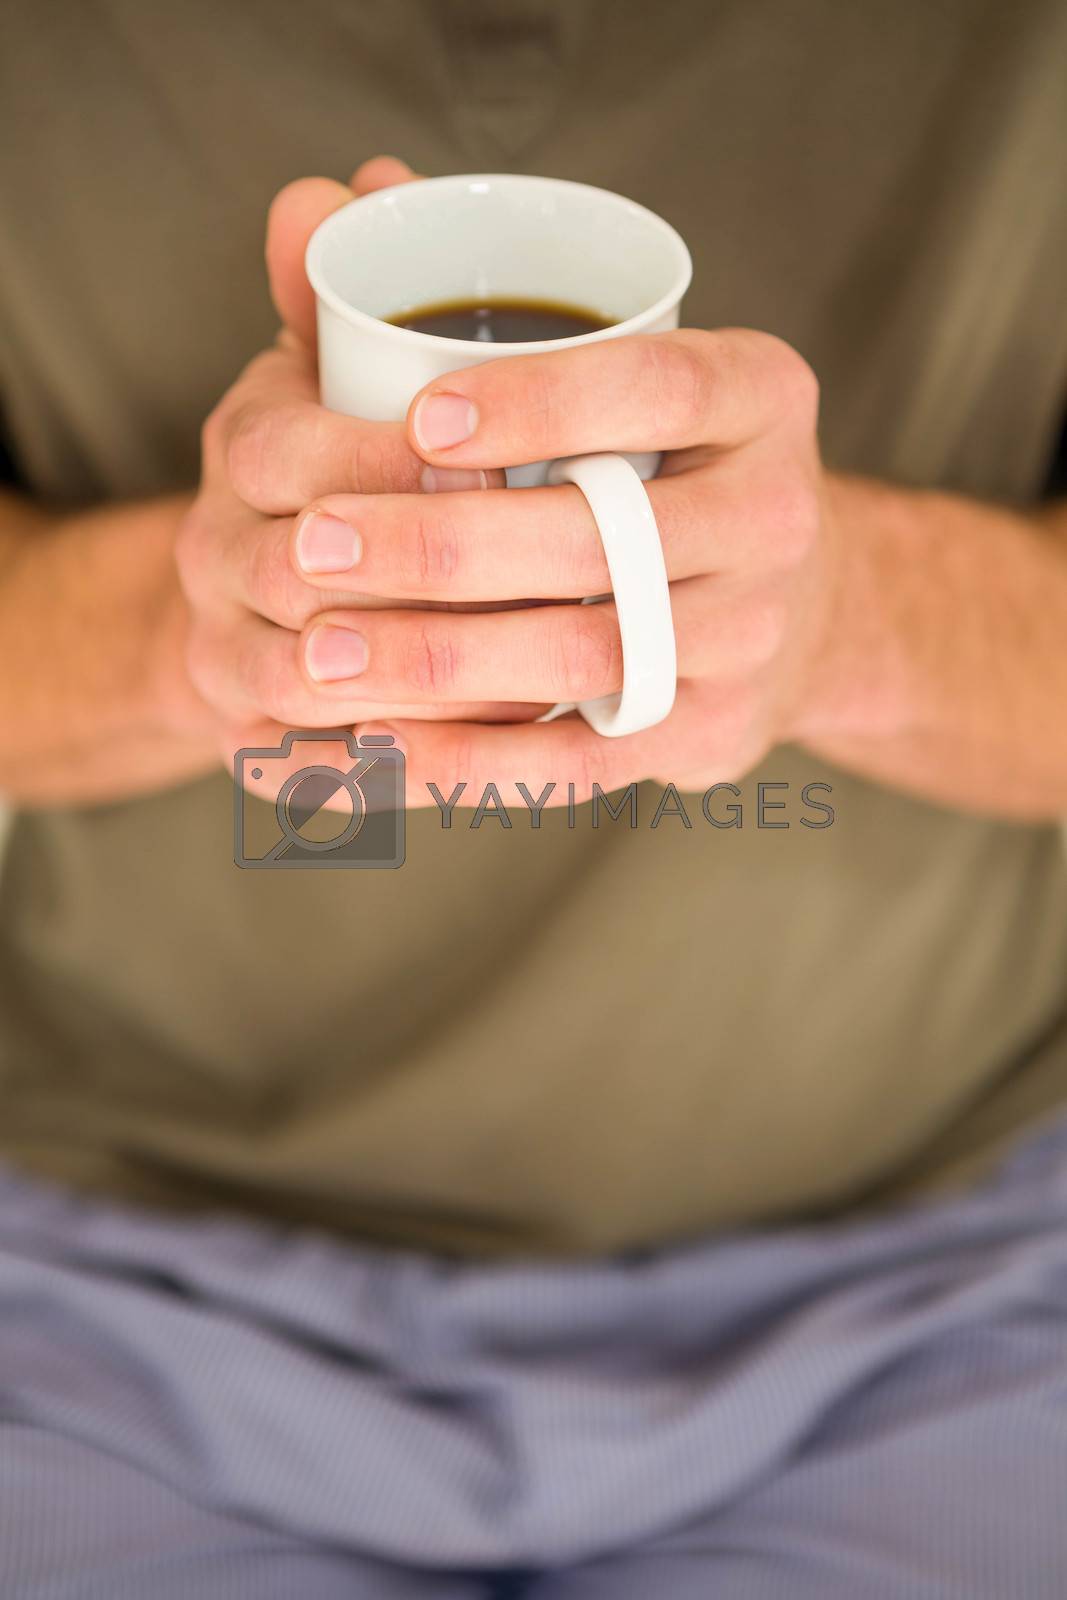 Royalty free image of Masculine hands holding a mug of tea by Wavebreakmedia